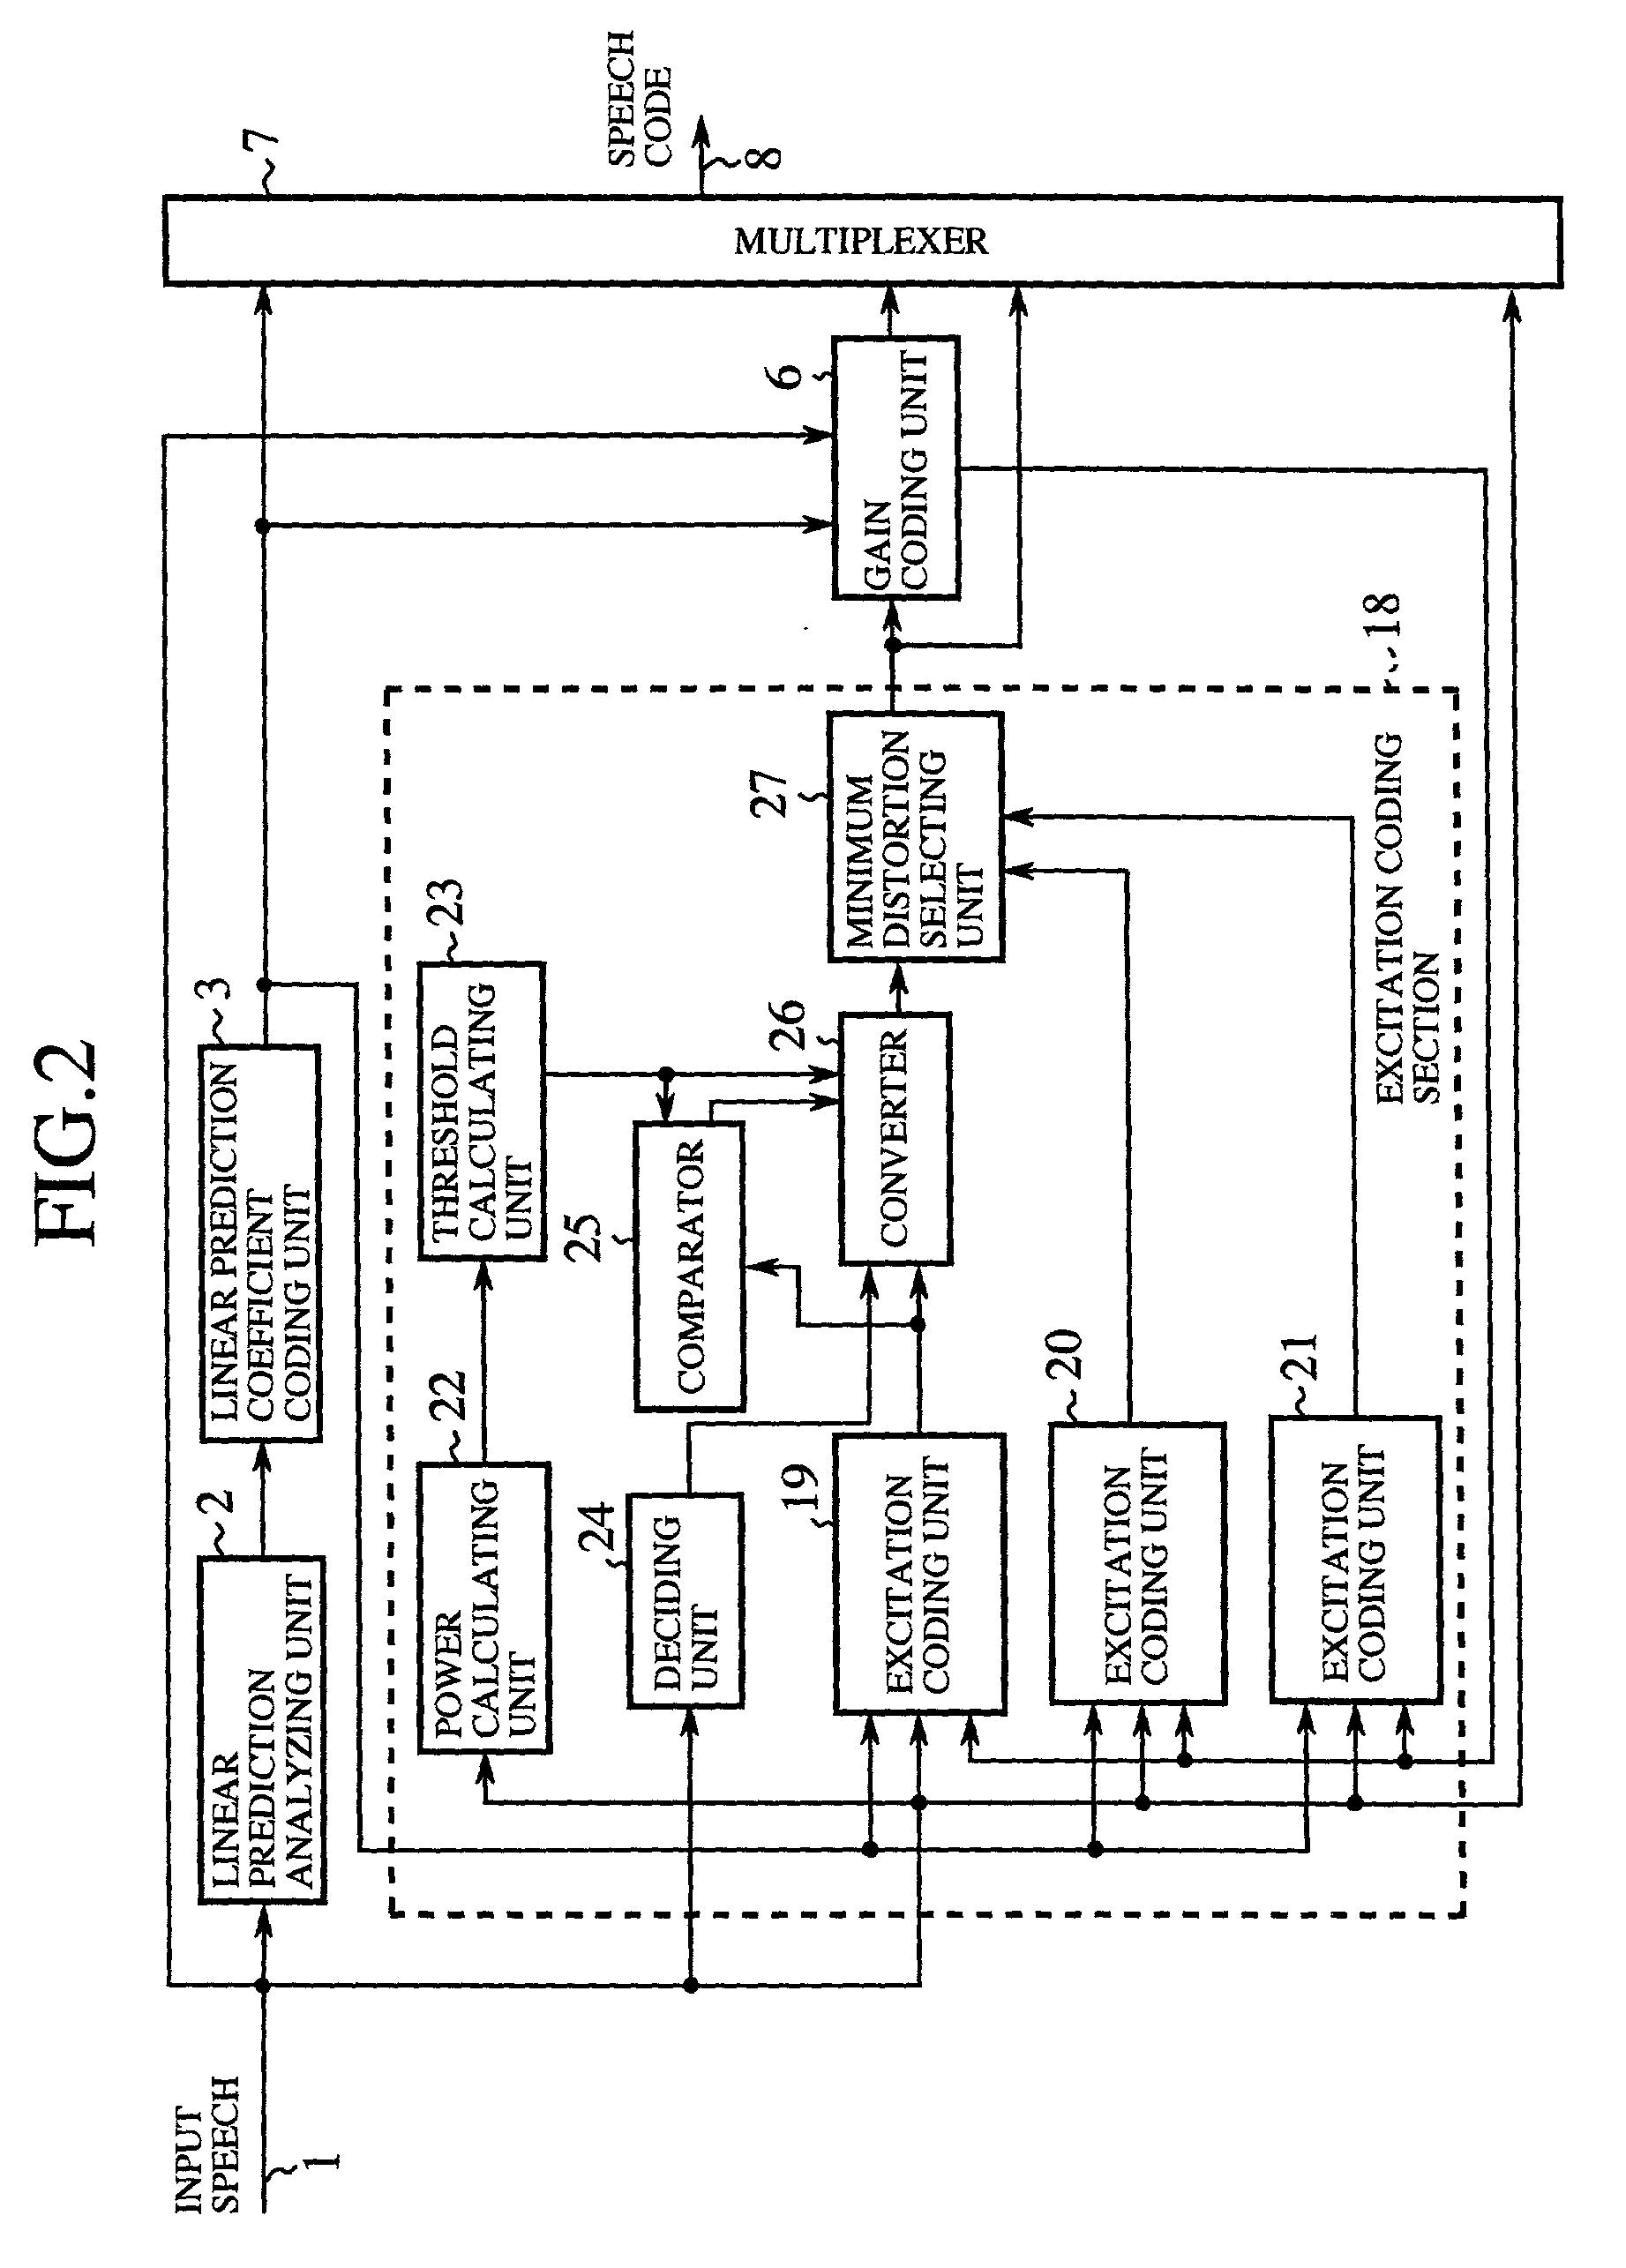 Voice encoding method and apparatus of selecting an excitation mode from a plurality of excitation modes and encoding an input speech using the excitation mode selected